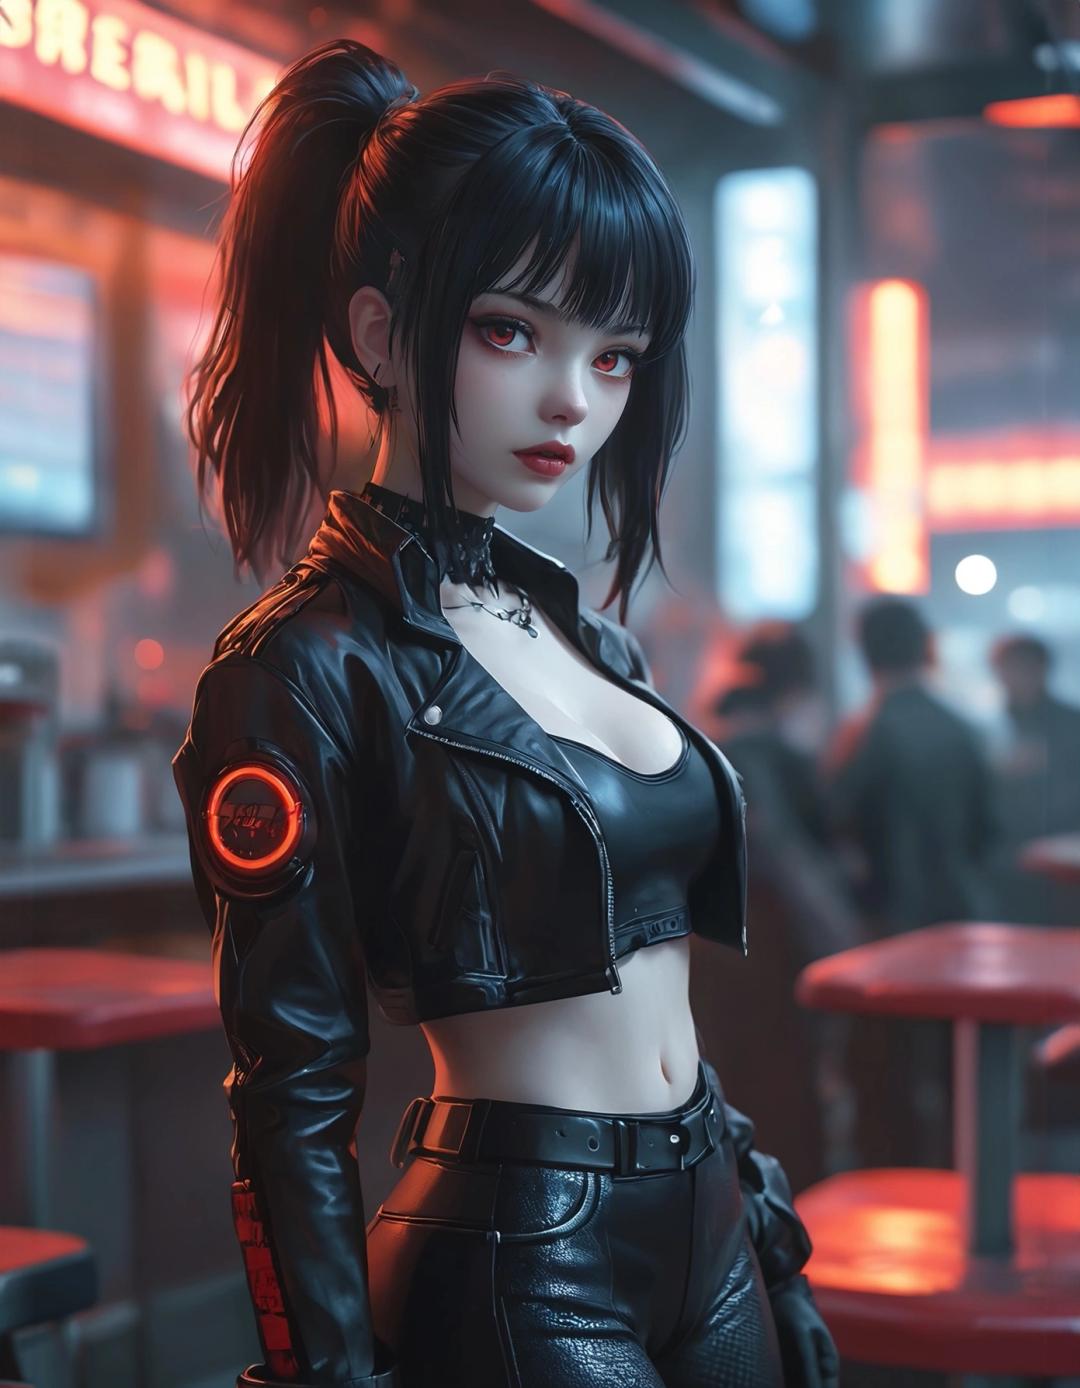 woman in a leather outfit with a black jacket standing in a restaurant cyberpunk